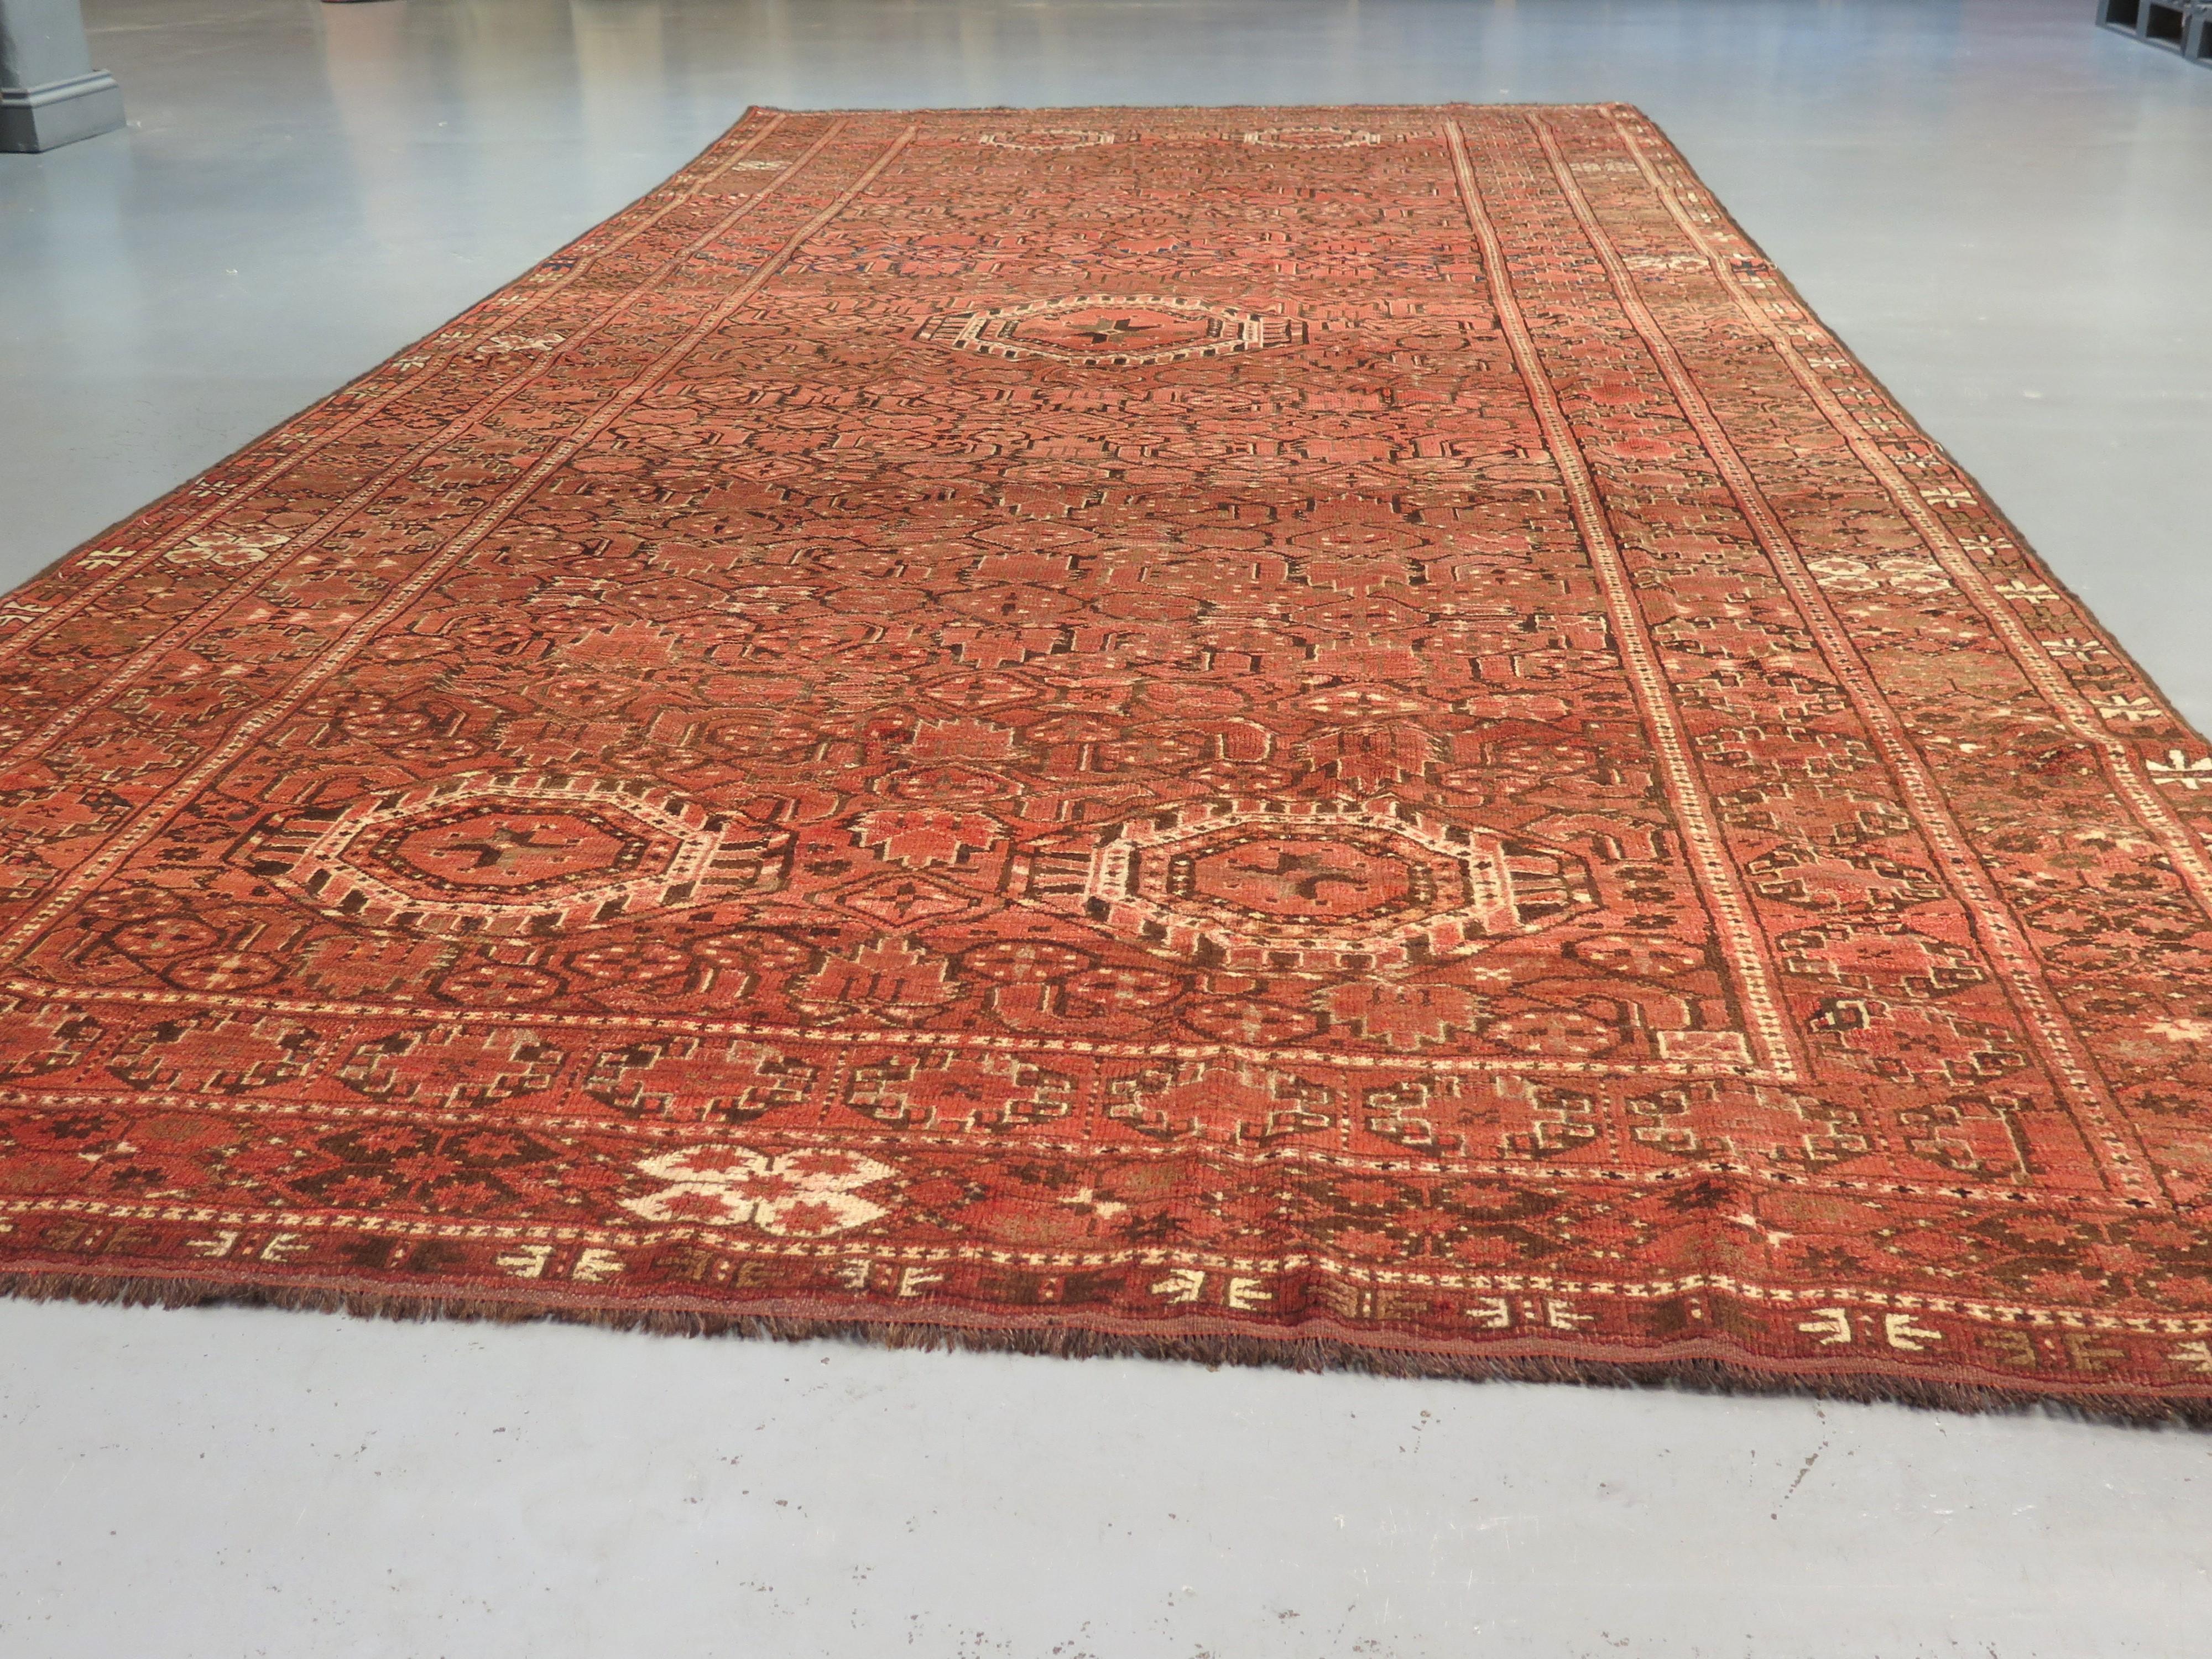 Vegetable Dyed Early Beshir Long Rug, c. 1880 For Sale